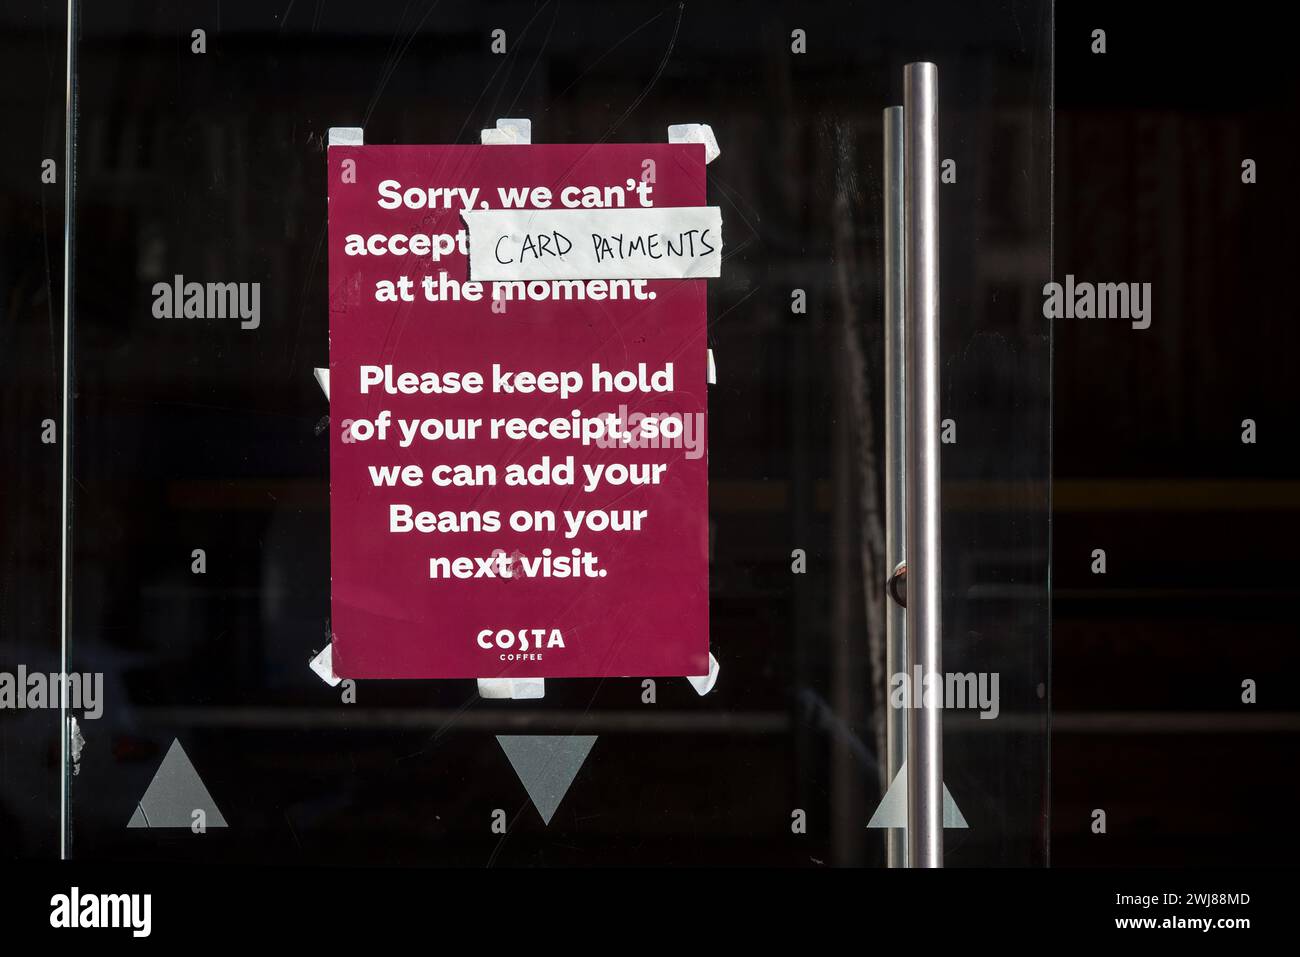 Notice on the door of a Costa Coffee shop inform customers that they can't accept card payments at the moment. Stock Photo